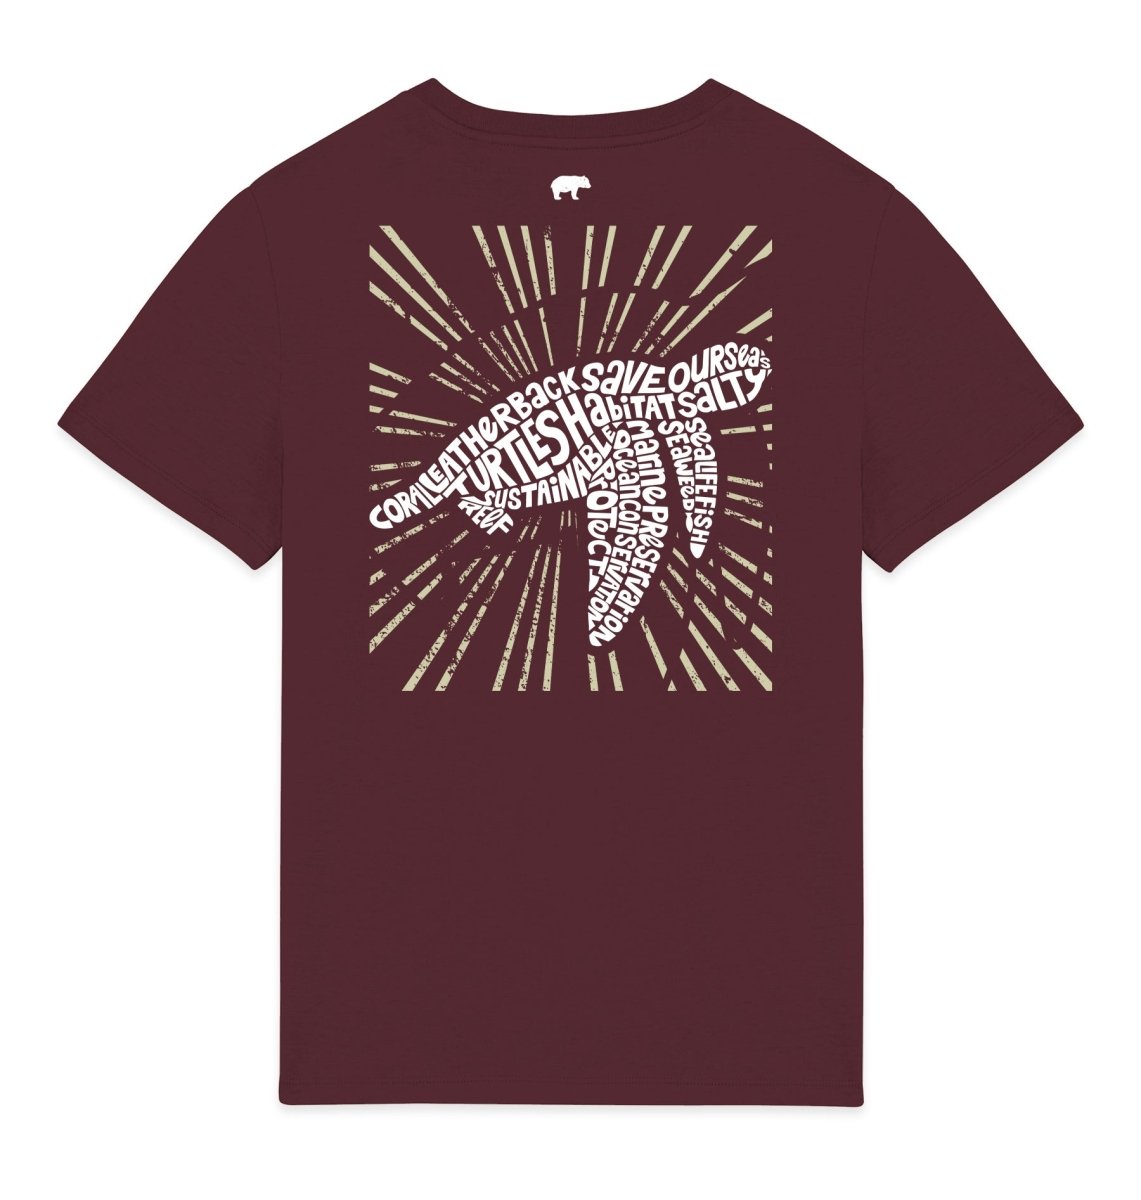 Turtle T-Shirt - Mens Save The Turtles Tee - Wildlife Clothing That Supports Marine Conservation, M / Plum